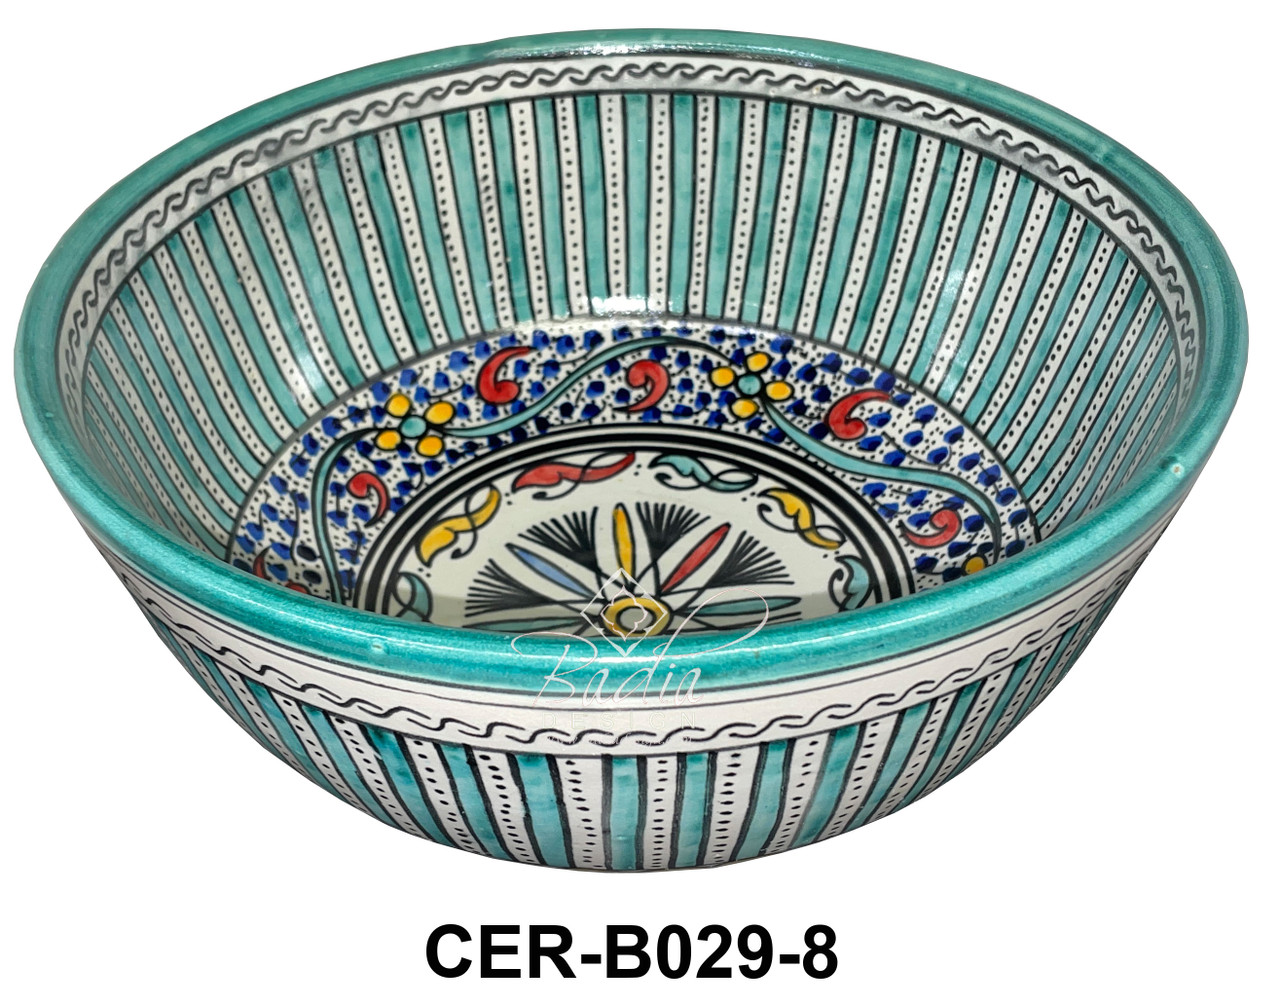 The Serving Bowl, Ceramic Bowls With Different Colors